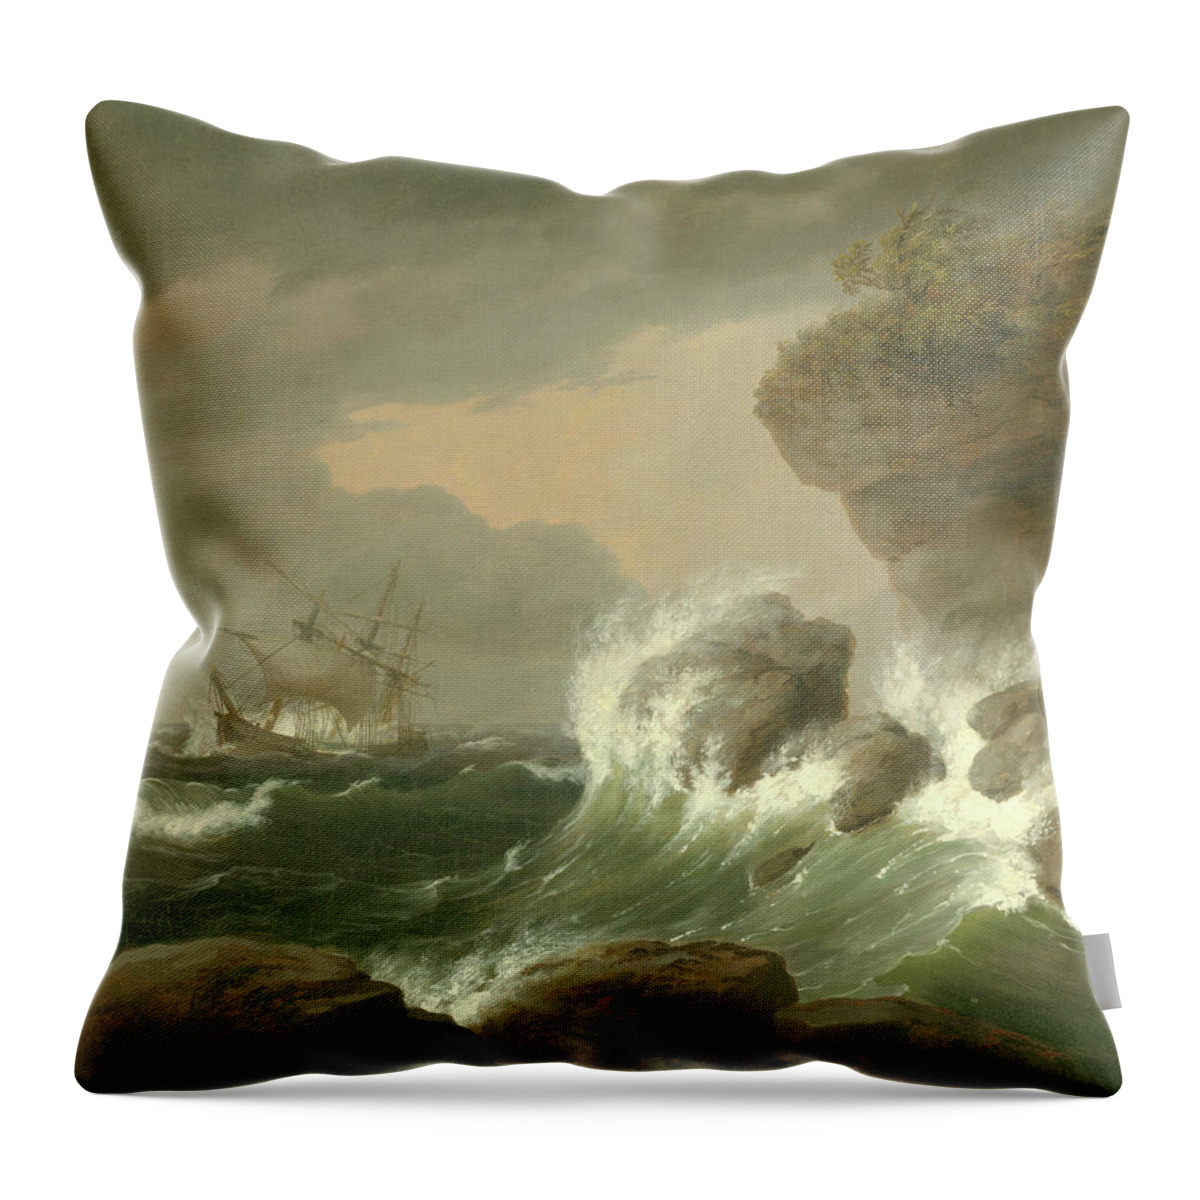 Seascape Throw Pillow featuring the painting Seascape, 1835 by Thomas Birch